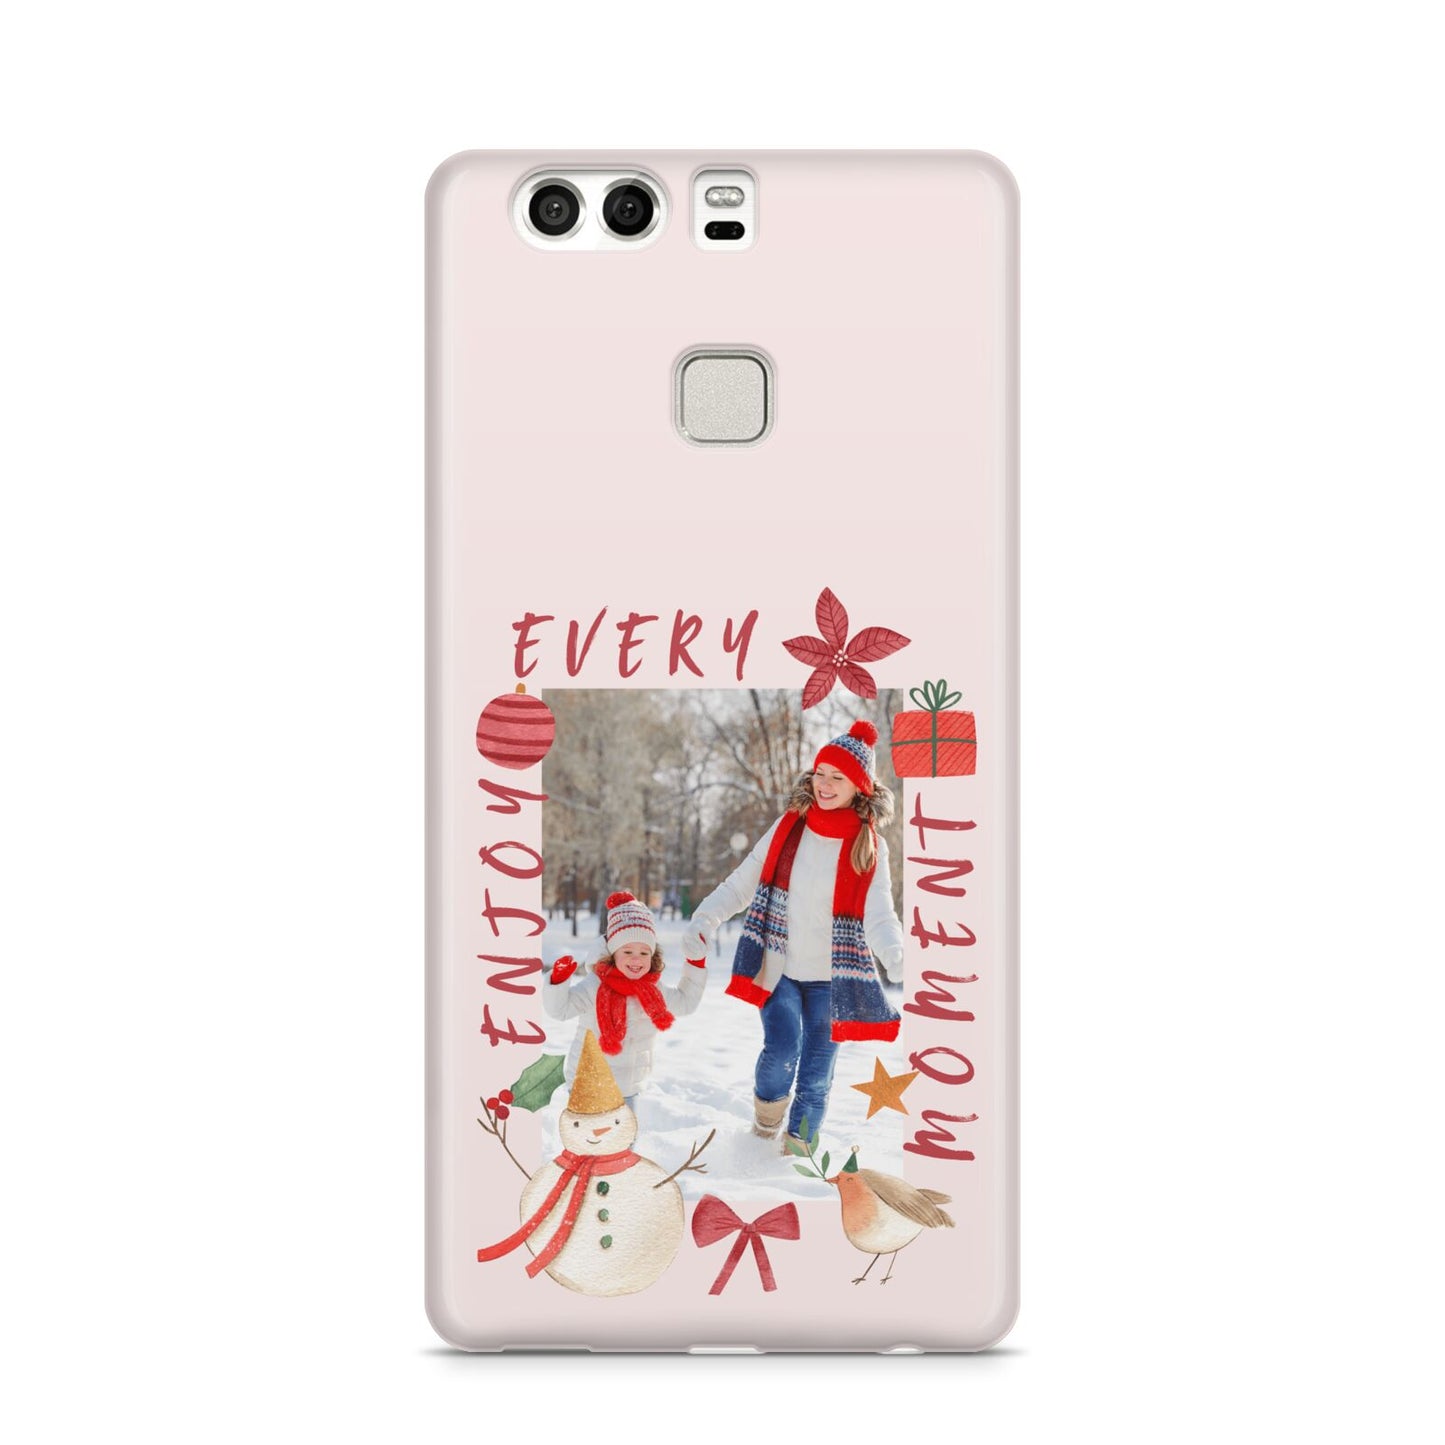 Personalised Christmas Moments Huawei P9 Case